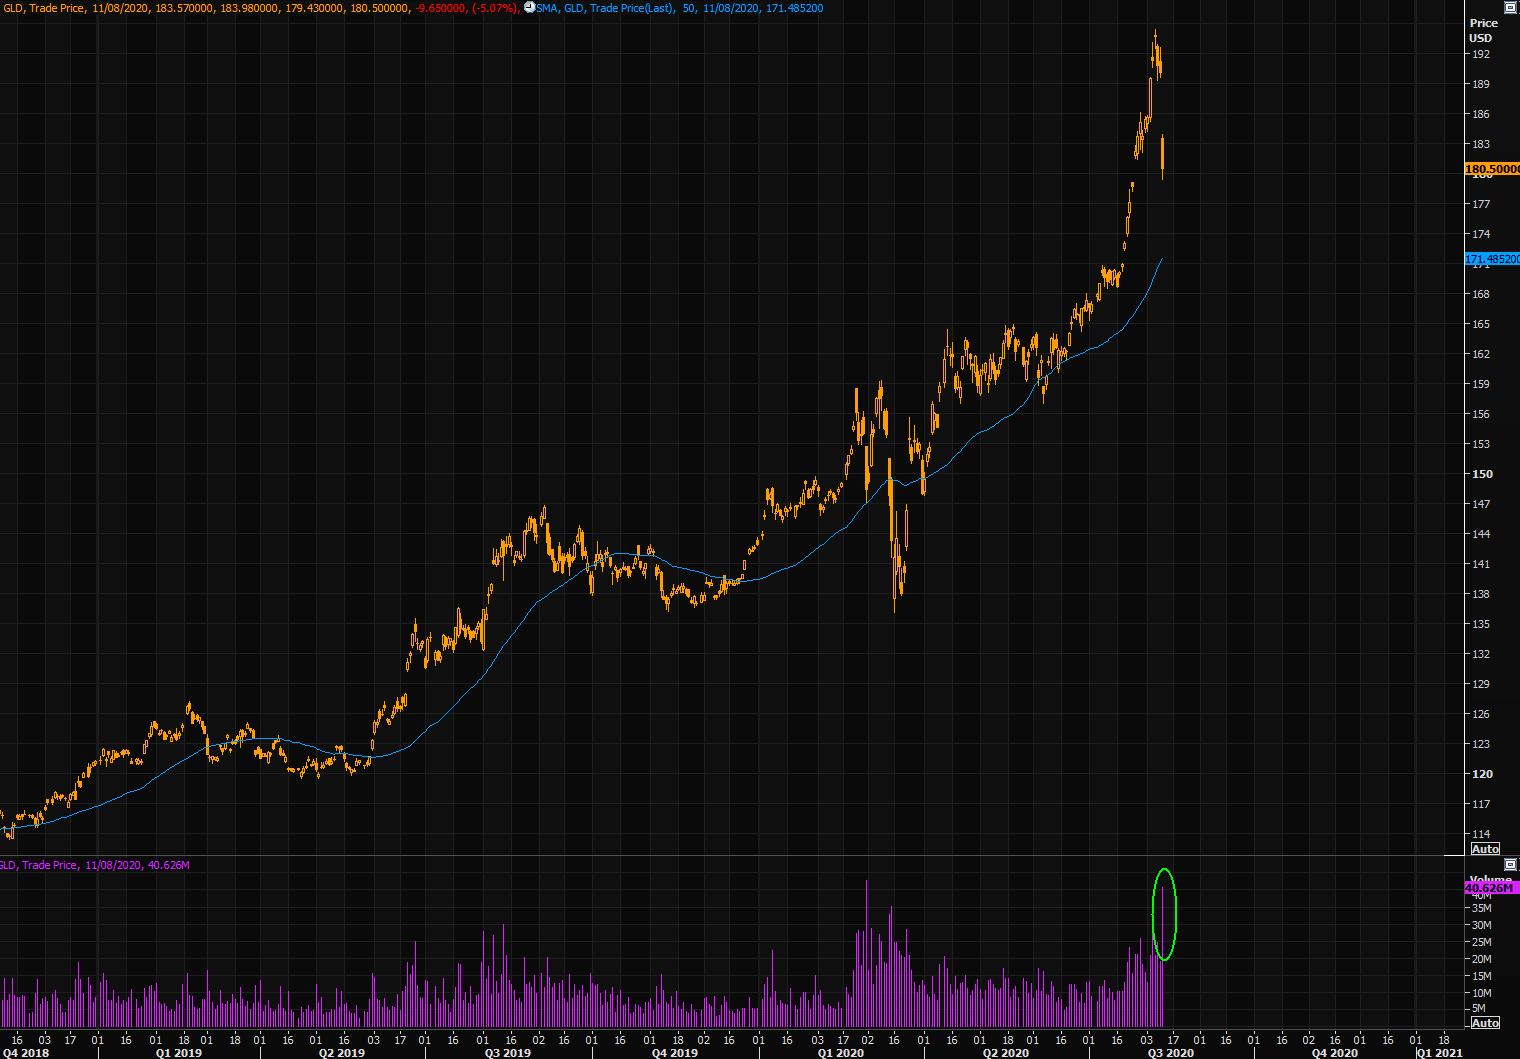 Gold volumes exploding as gold crashes